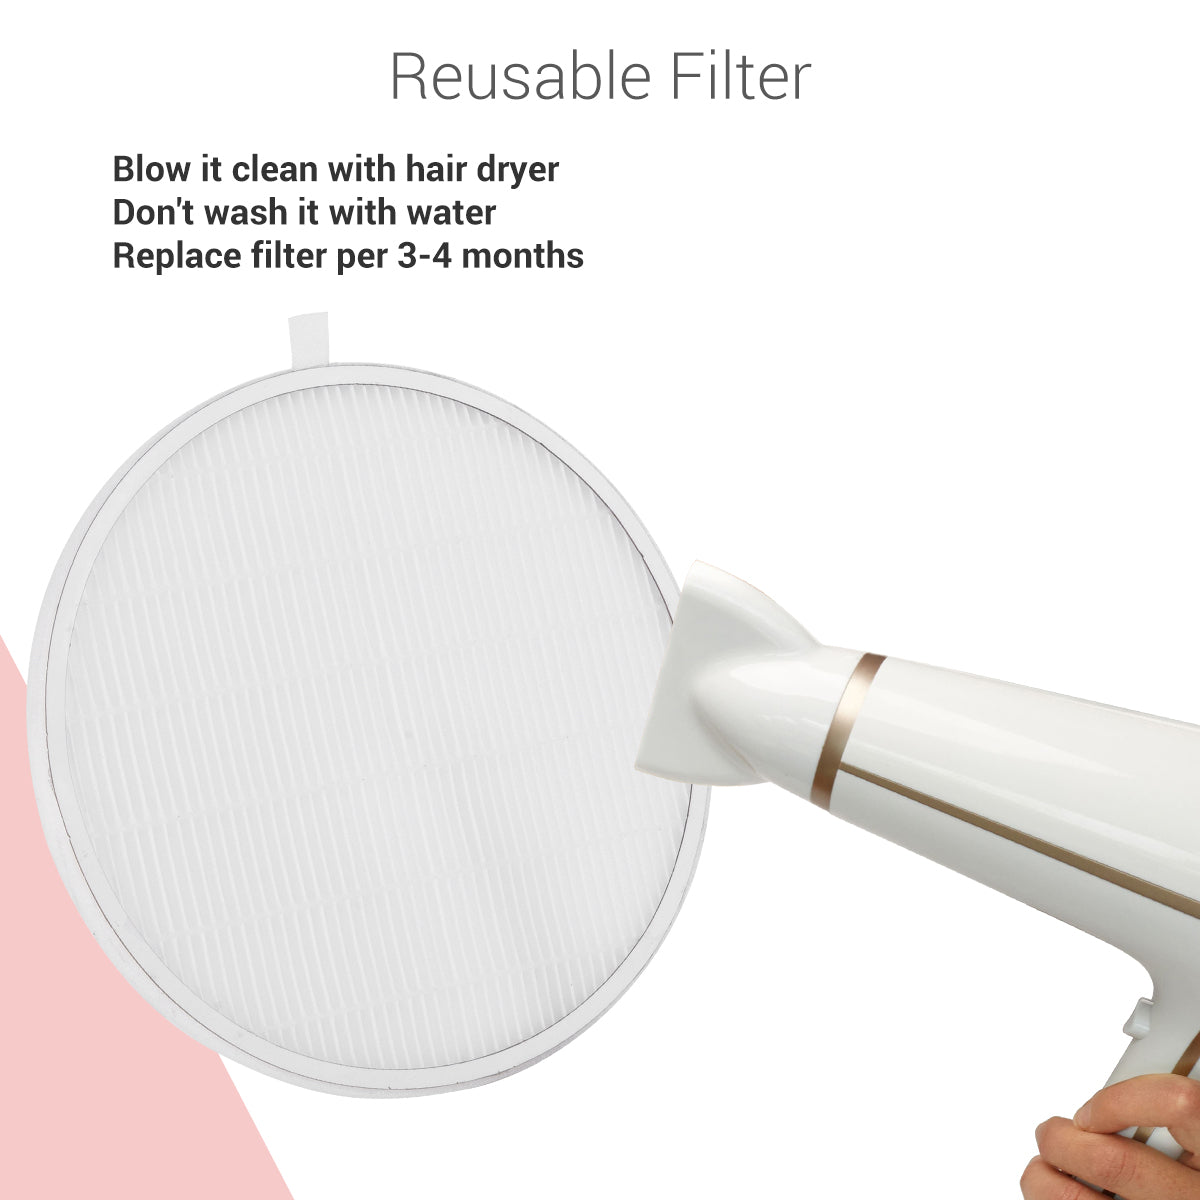 nail dust collector-reusable filter